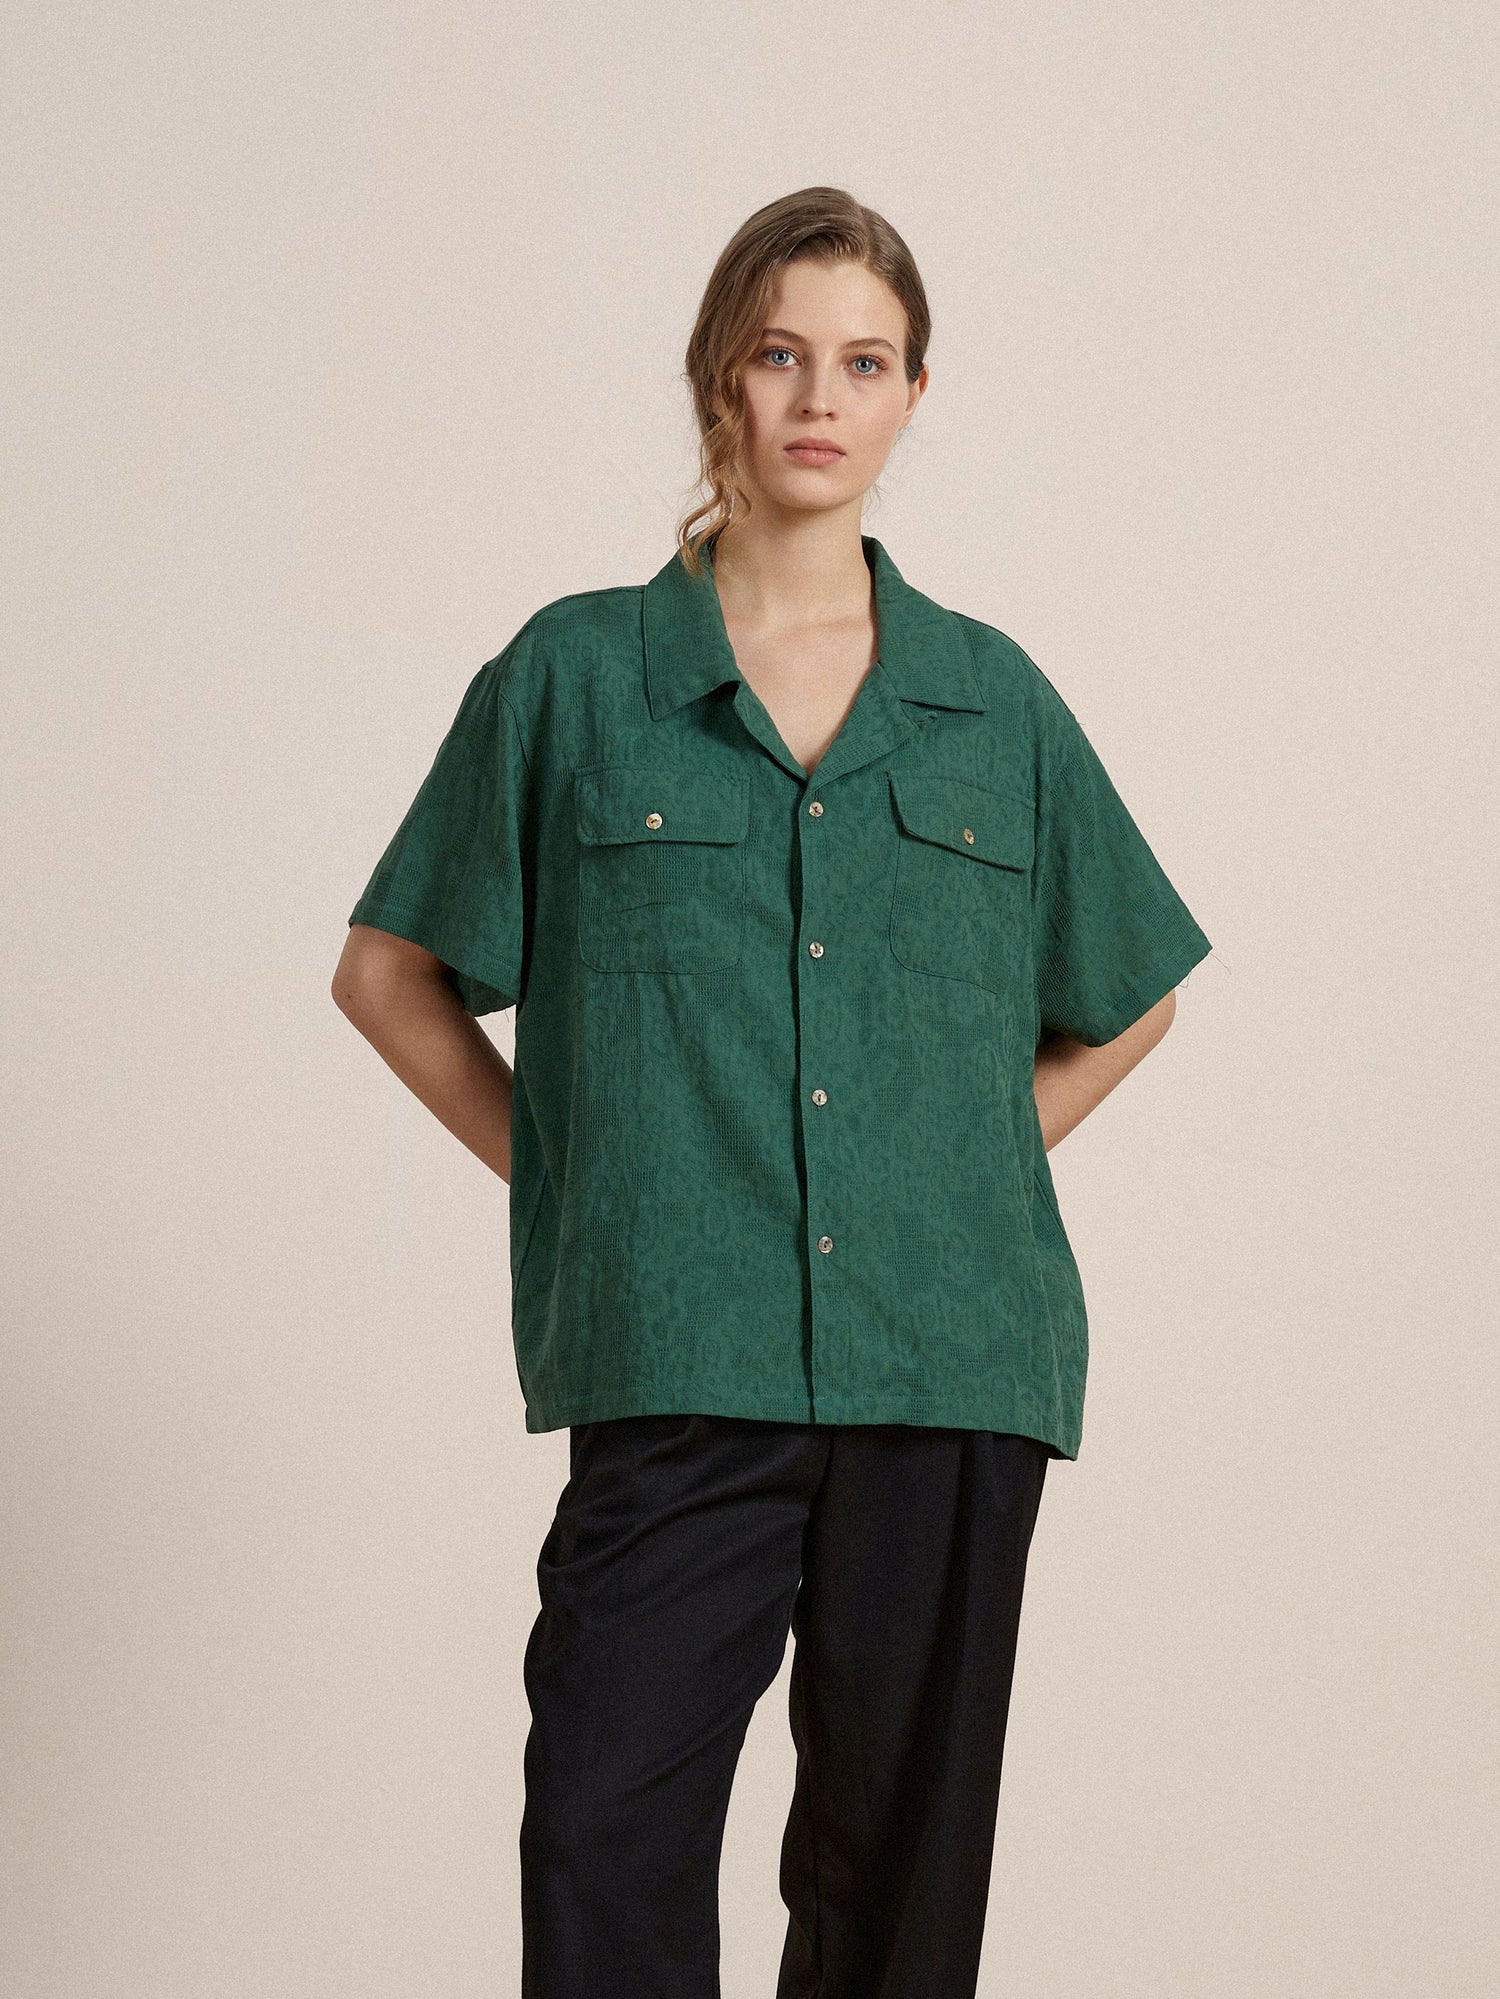 A model wearing a premium cotton Found Mount Camp Shirt with lace detailing and black pants.